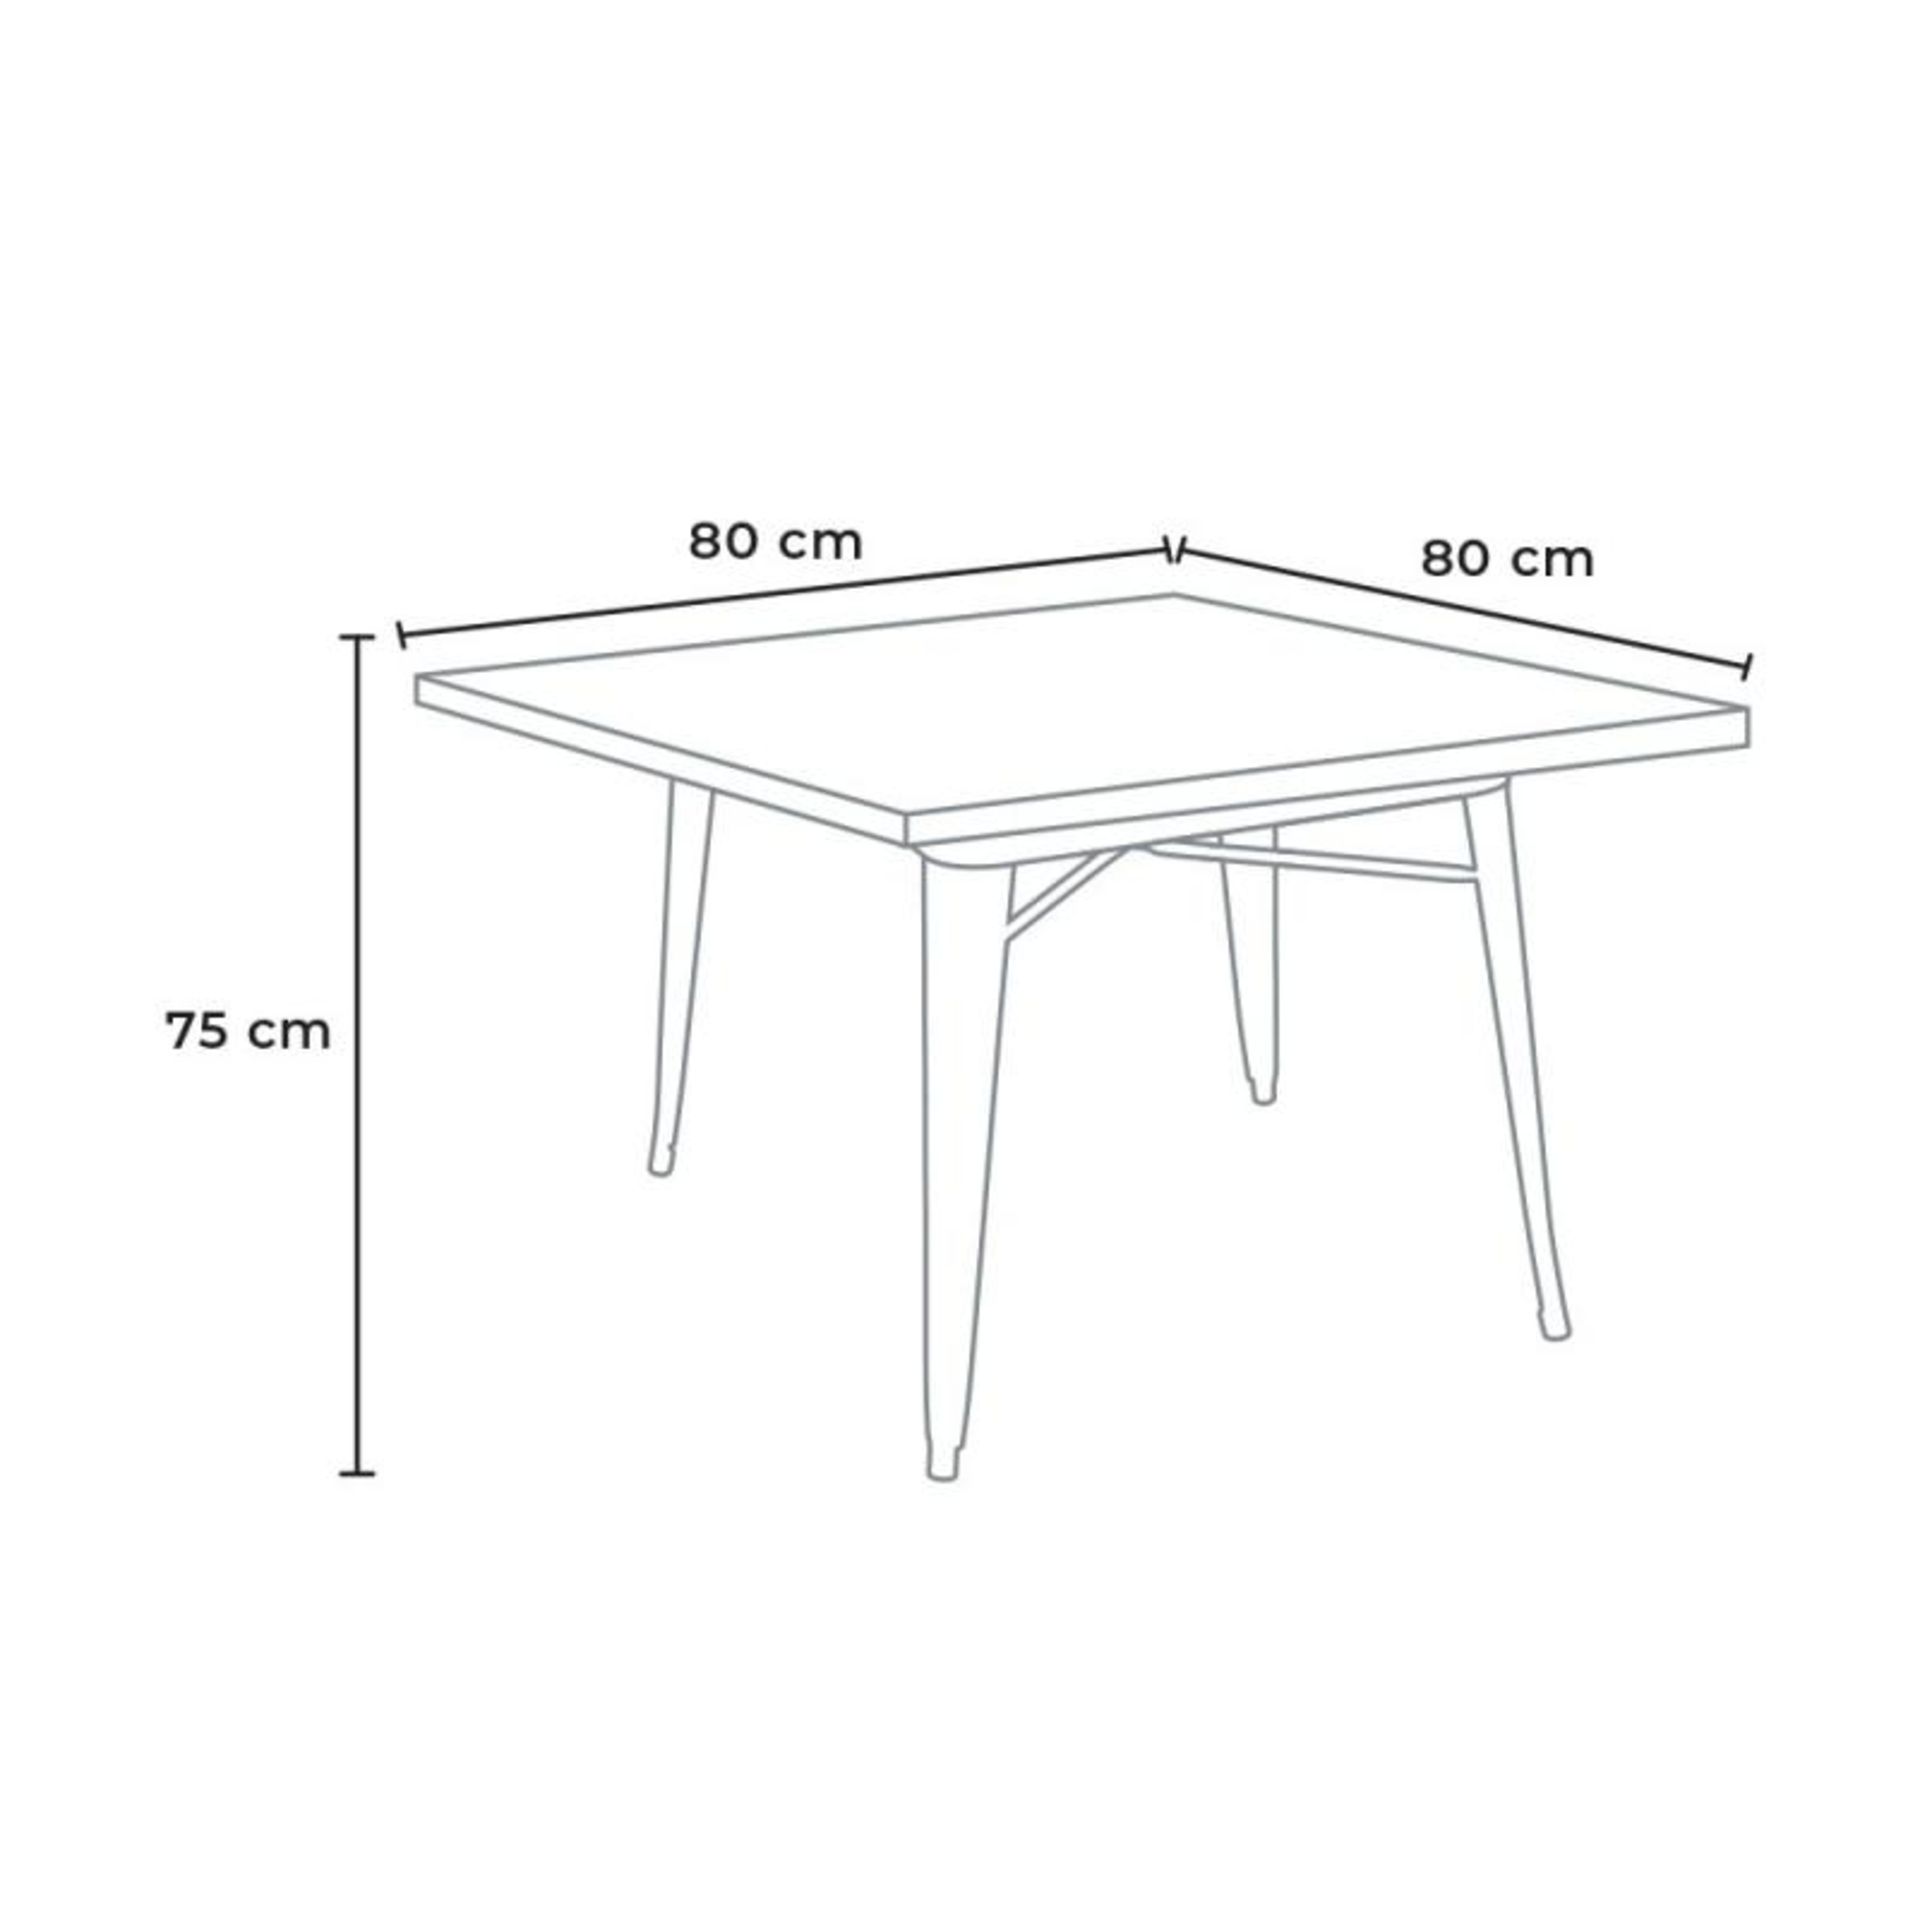 1 x Xavier Pauchard / Tolix Inspired Industrial Outdoor Table In Silver Grey - Dimensions: 80 x 80 x - Image 2 of 3